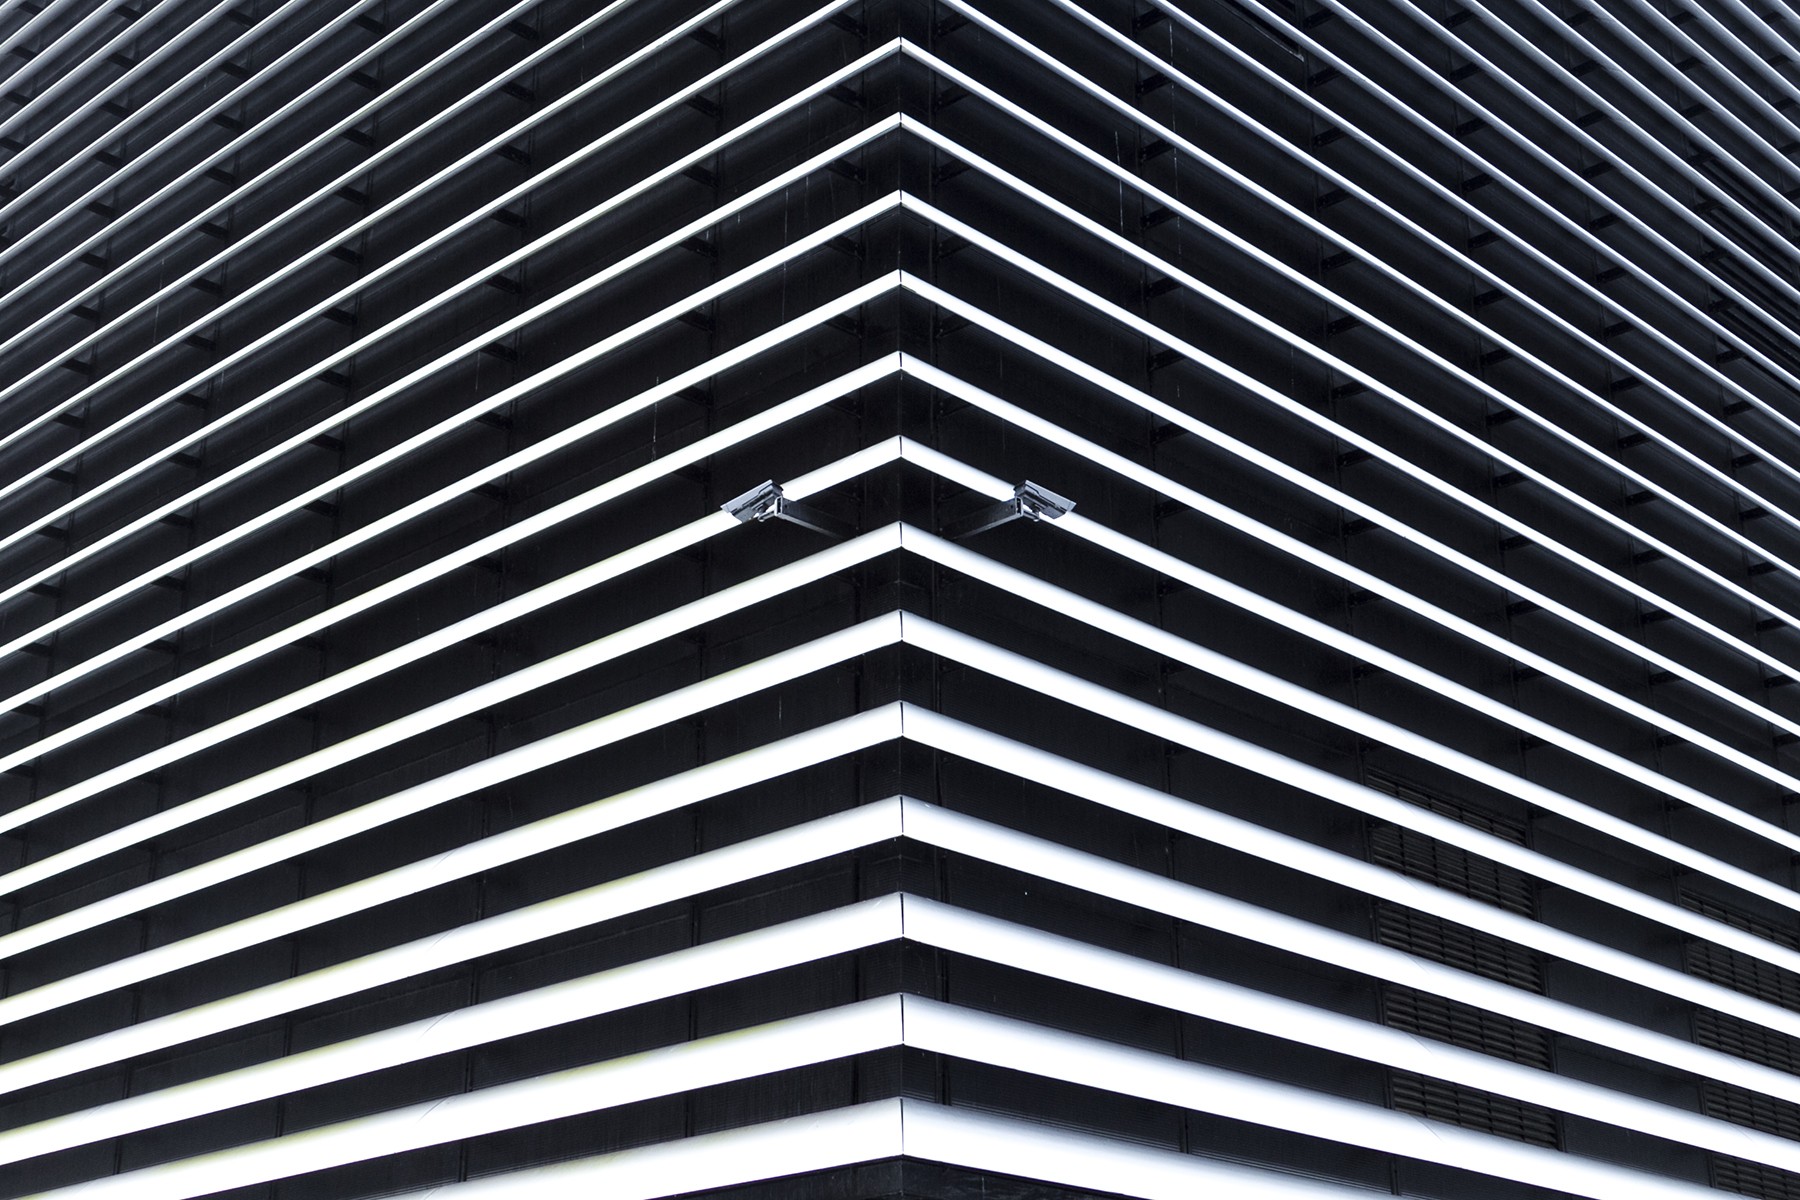  abstract  Lights Black White Architecture  Building 